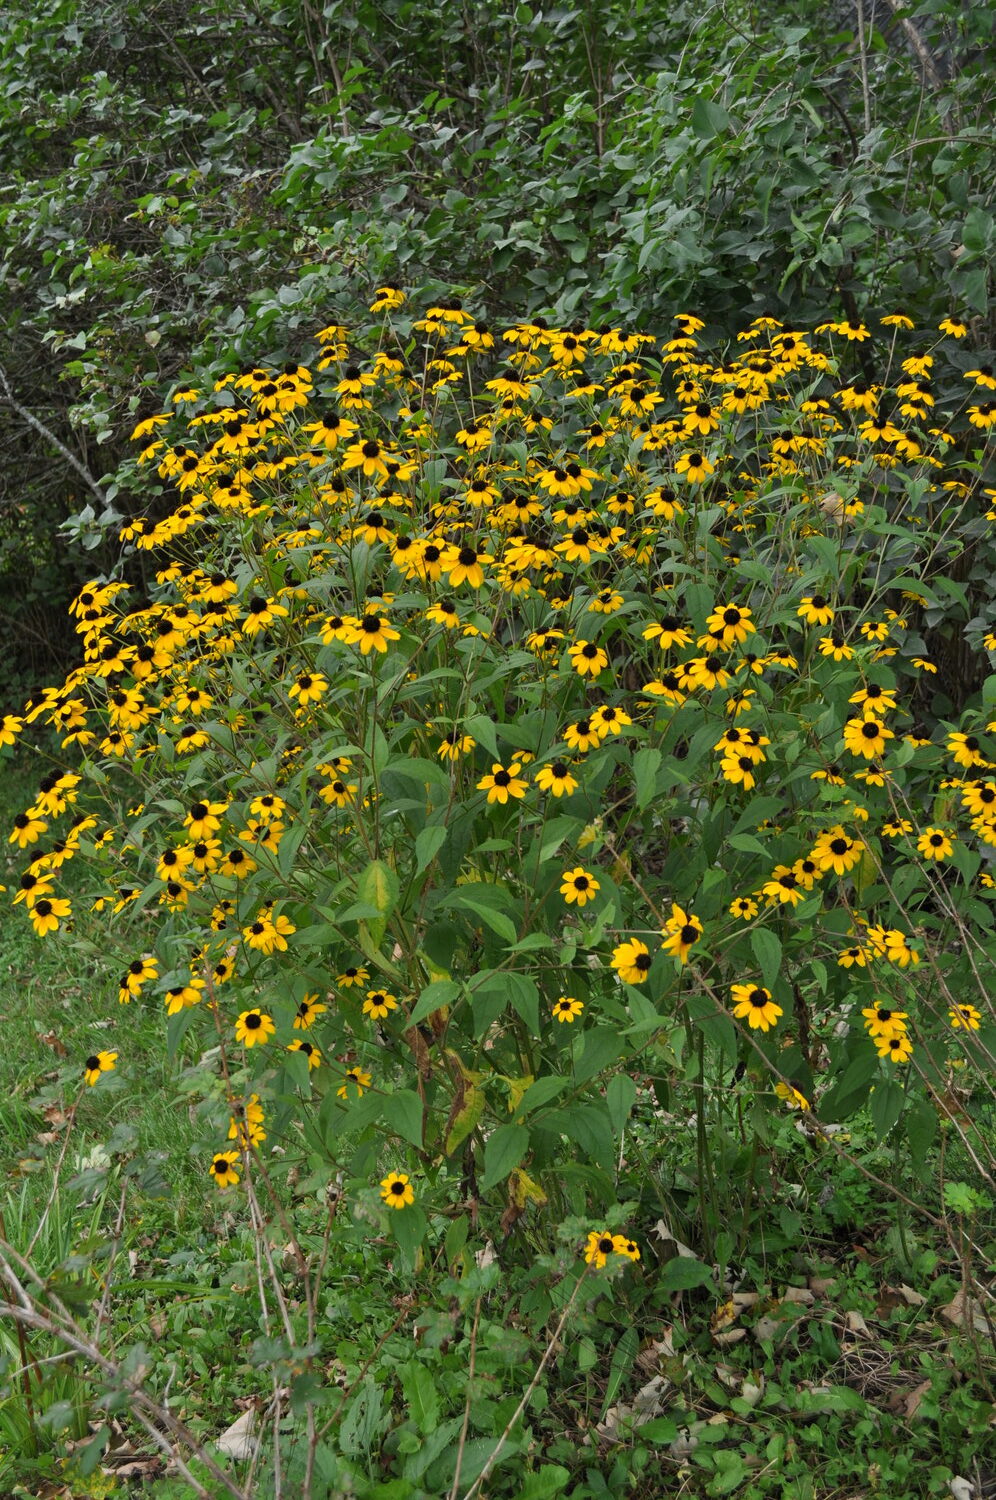 Rudbeckia triloba is a small-flowered Rudbeckia and a native wildflower. It can grow as tall as 6 feet or more (often shorter) and flowers from June through October. The flowers are great for a number of pollinators and several species of birds feed on the seeds.  Self-seeding, it needs to be managed but is not at all invasive. ANDREW MESSINGER